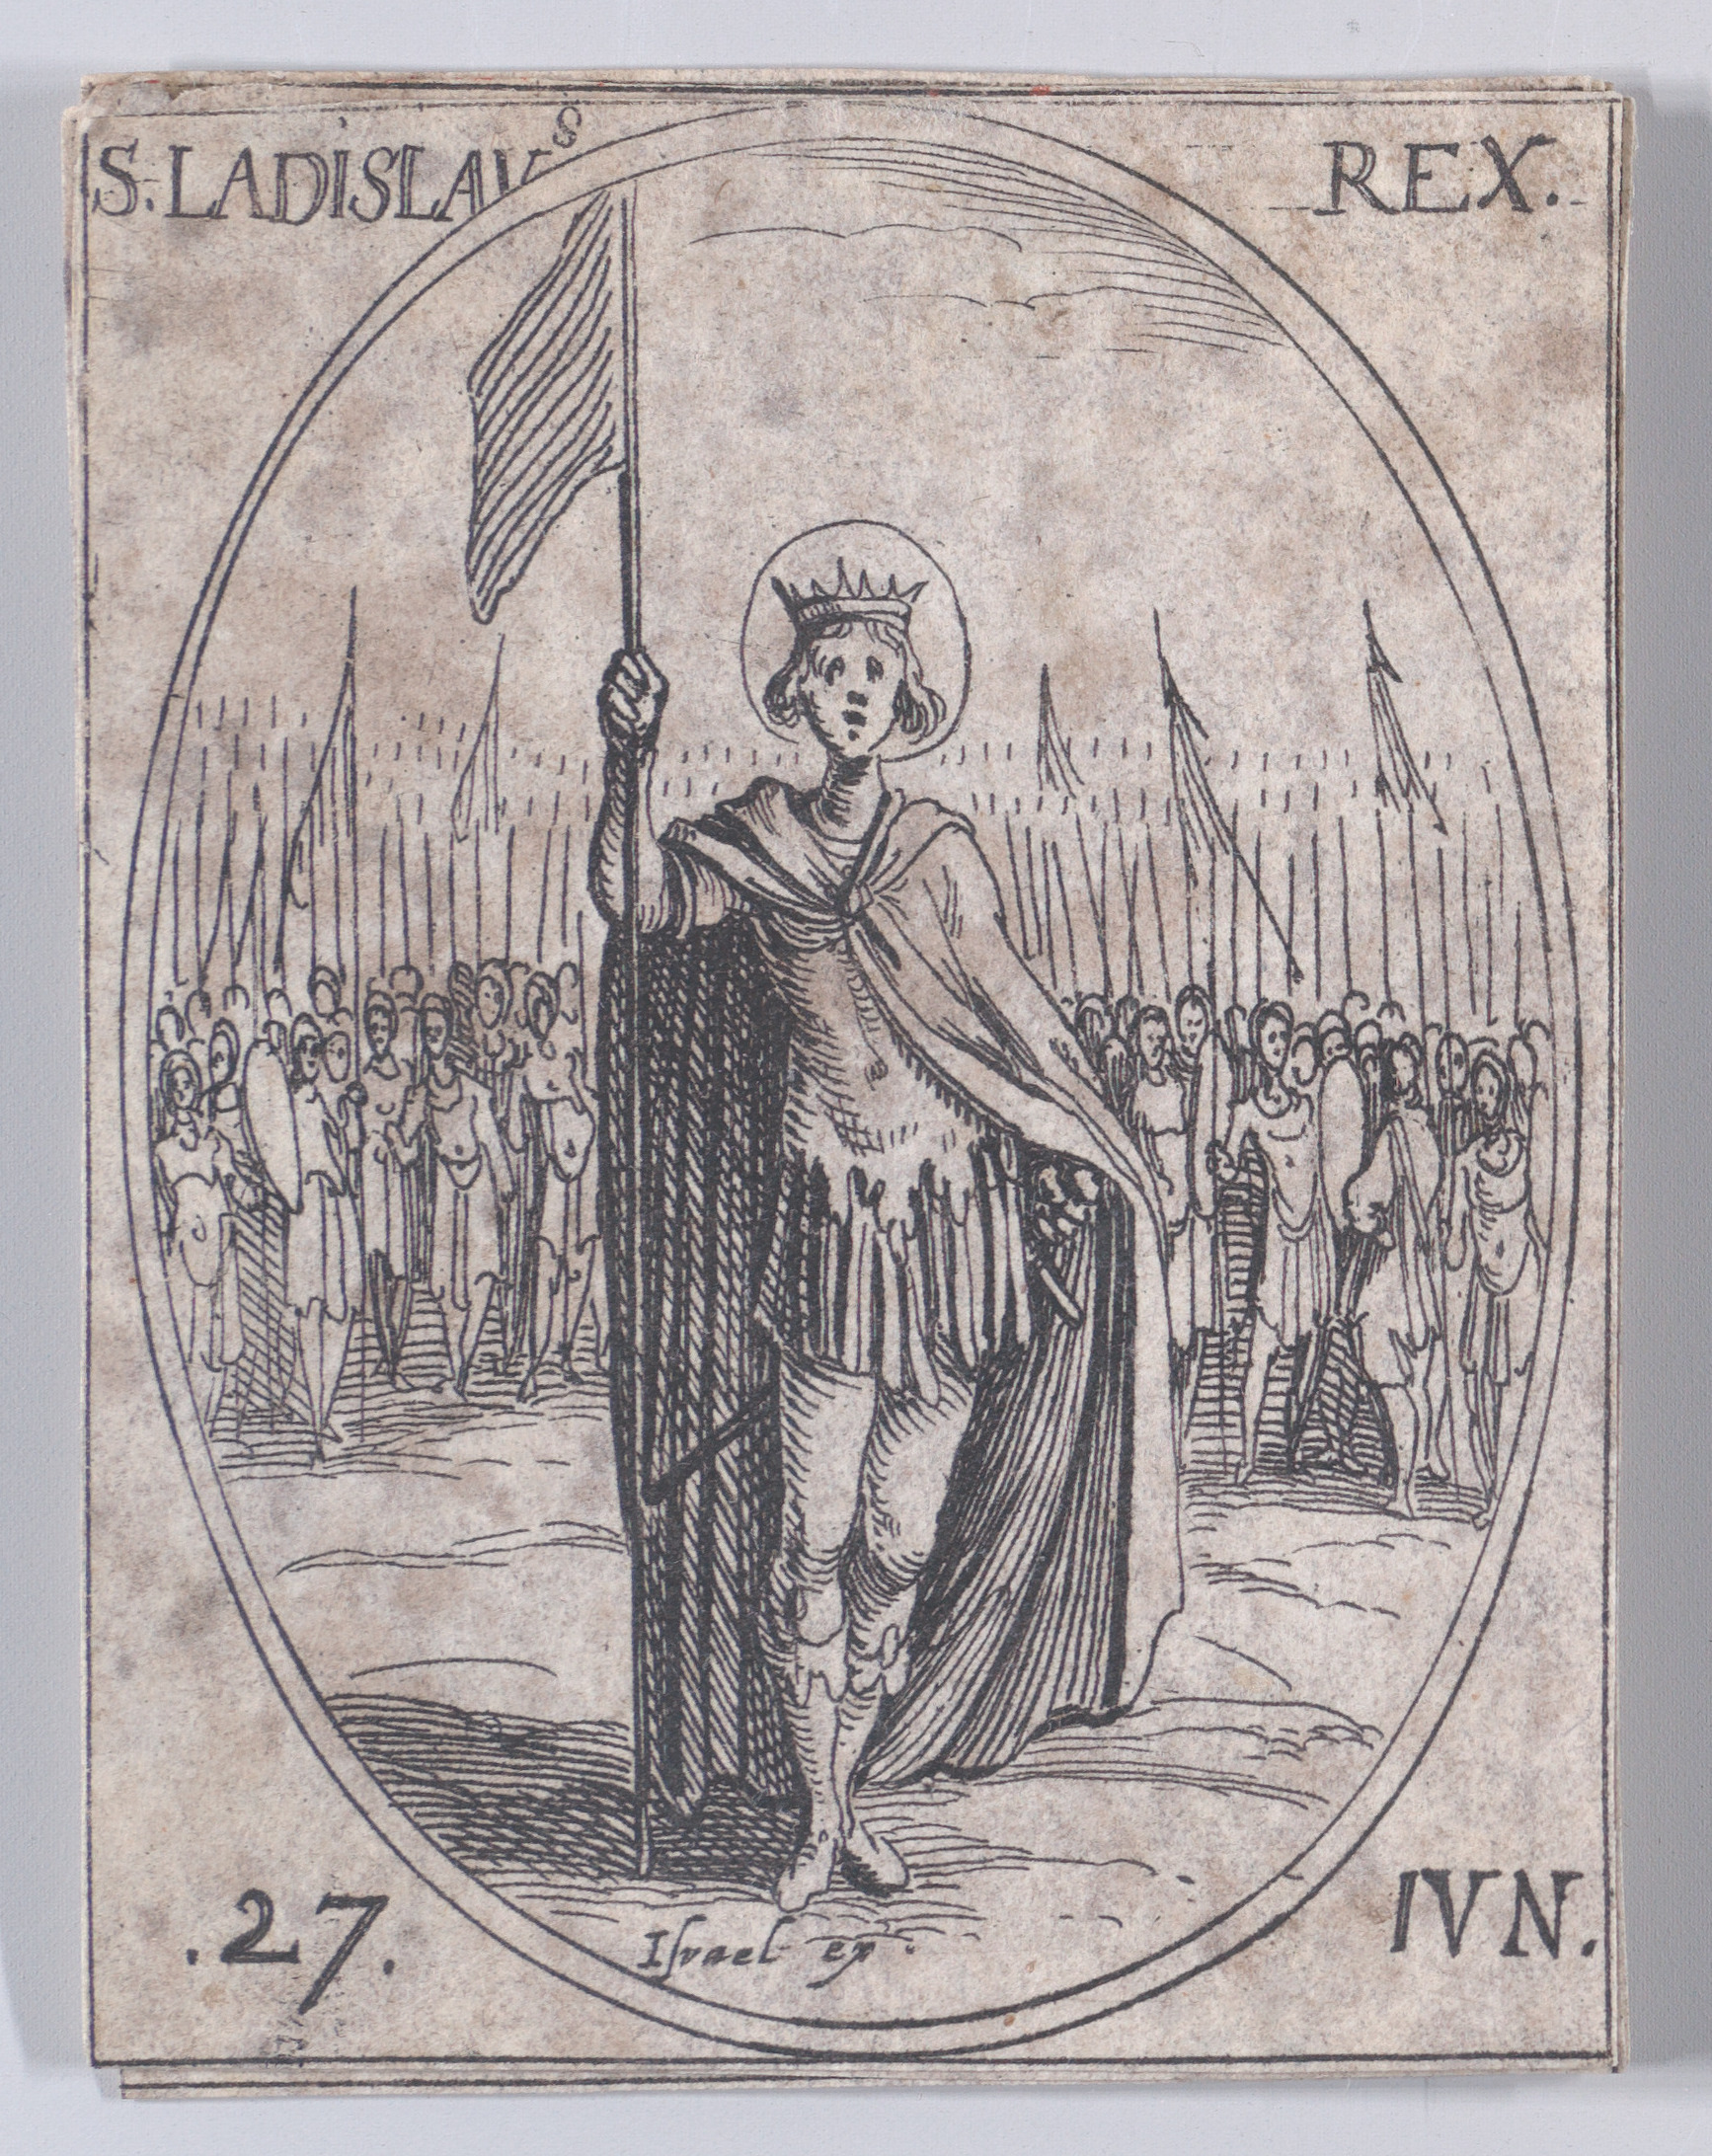 S. Ladislas, roi (St. Ladislaus, King), June 27th, from Les Images De Tous Les Saincts et Saintes de L'Année (Images of All of the Saints and Religious Events of the Year), Jacques Callot (French, Nancy 1592–1635 Nancy), Etching; second state of two (Lieure)